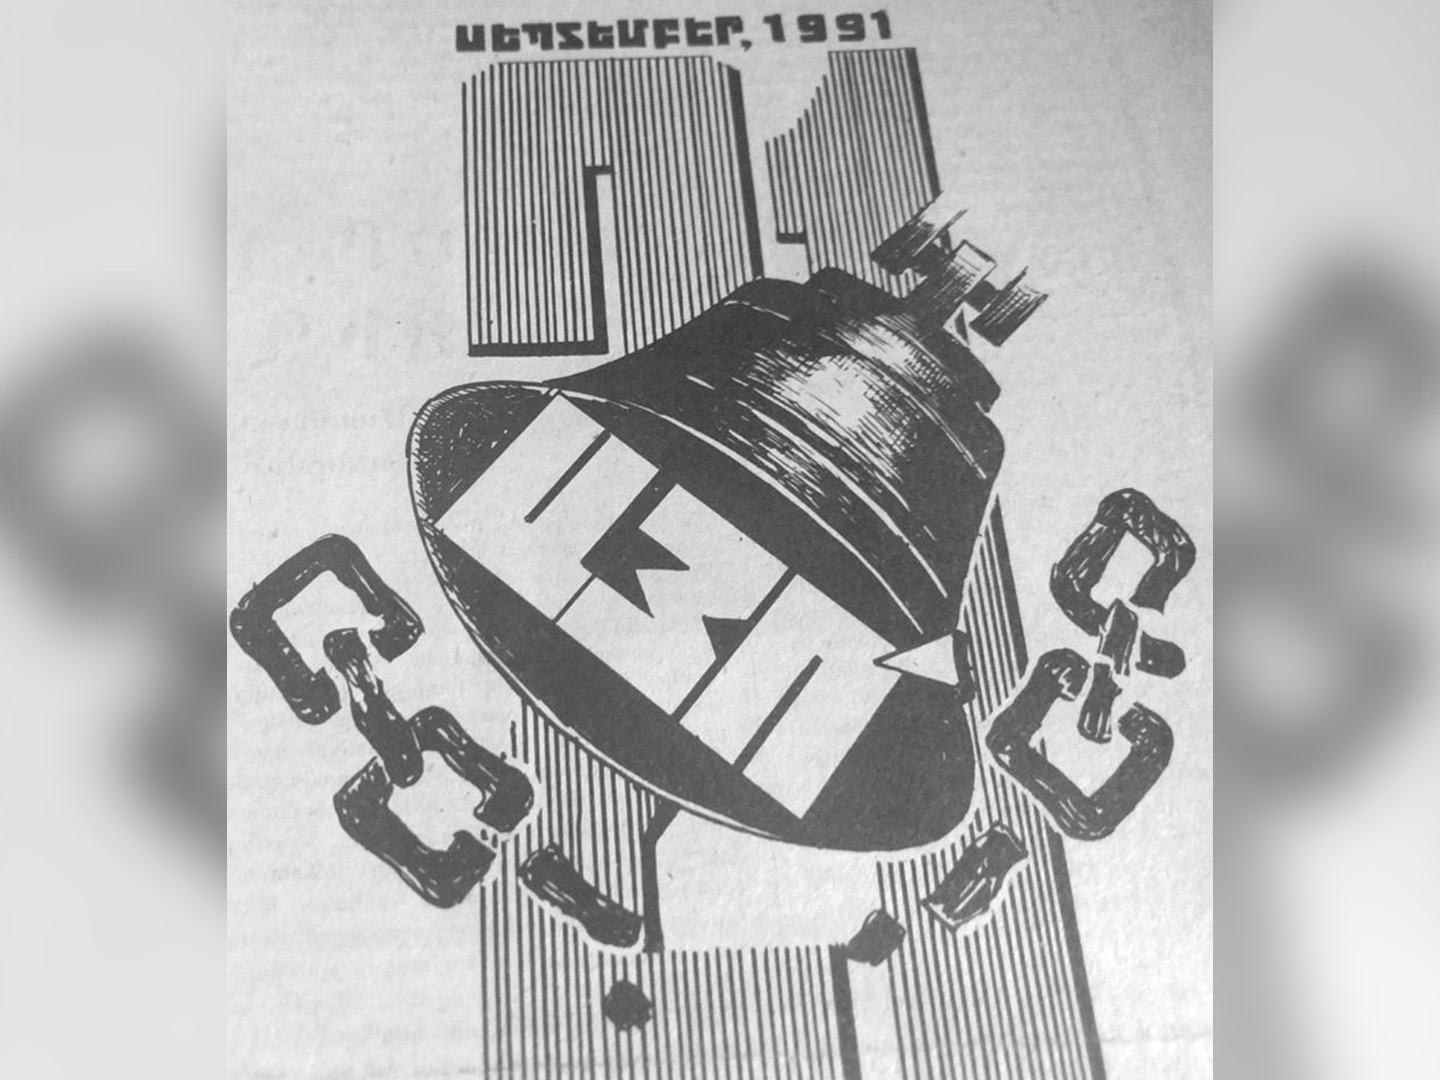 The “YES!” to independence bell published in the September 21, 1991 issue of the Soviet daily “Evening Yerevan” when 99.5 percent of the Armenian public voted to secede from the U.S.S.R.